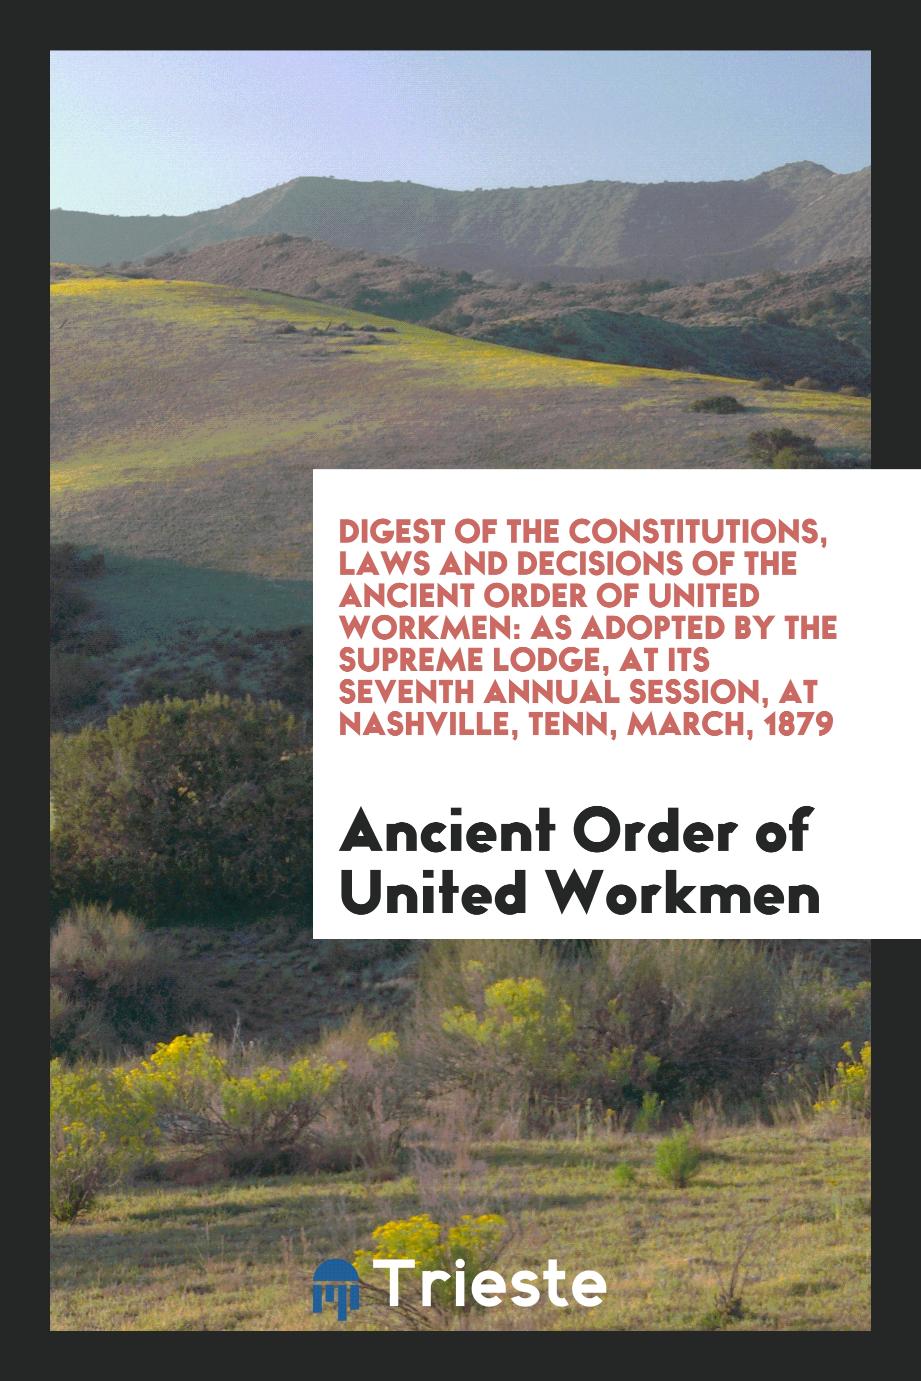 Digest of the Constitutions, Laws and Decisions of the Ancient Order of United Workmen: As Adopted by the Supreme Lodge, at Its Seventh Annual Session, at Nashville, Tenn, March, 1879